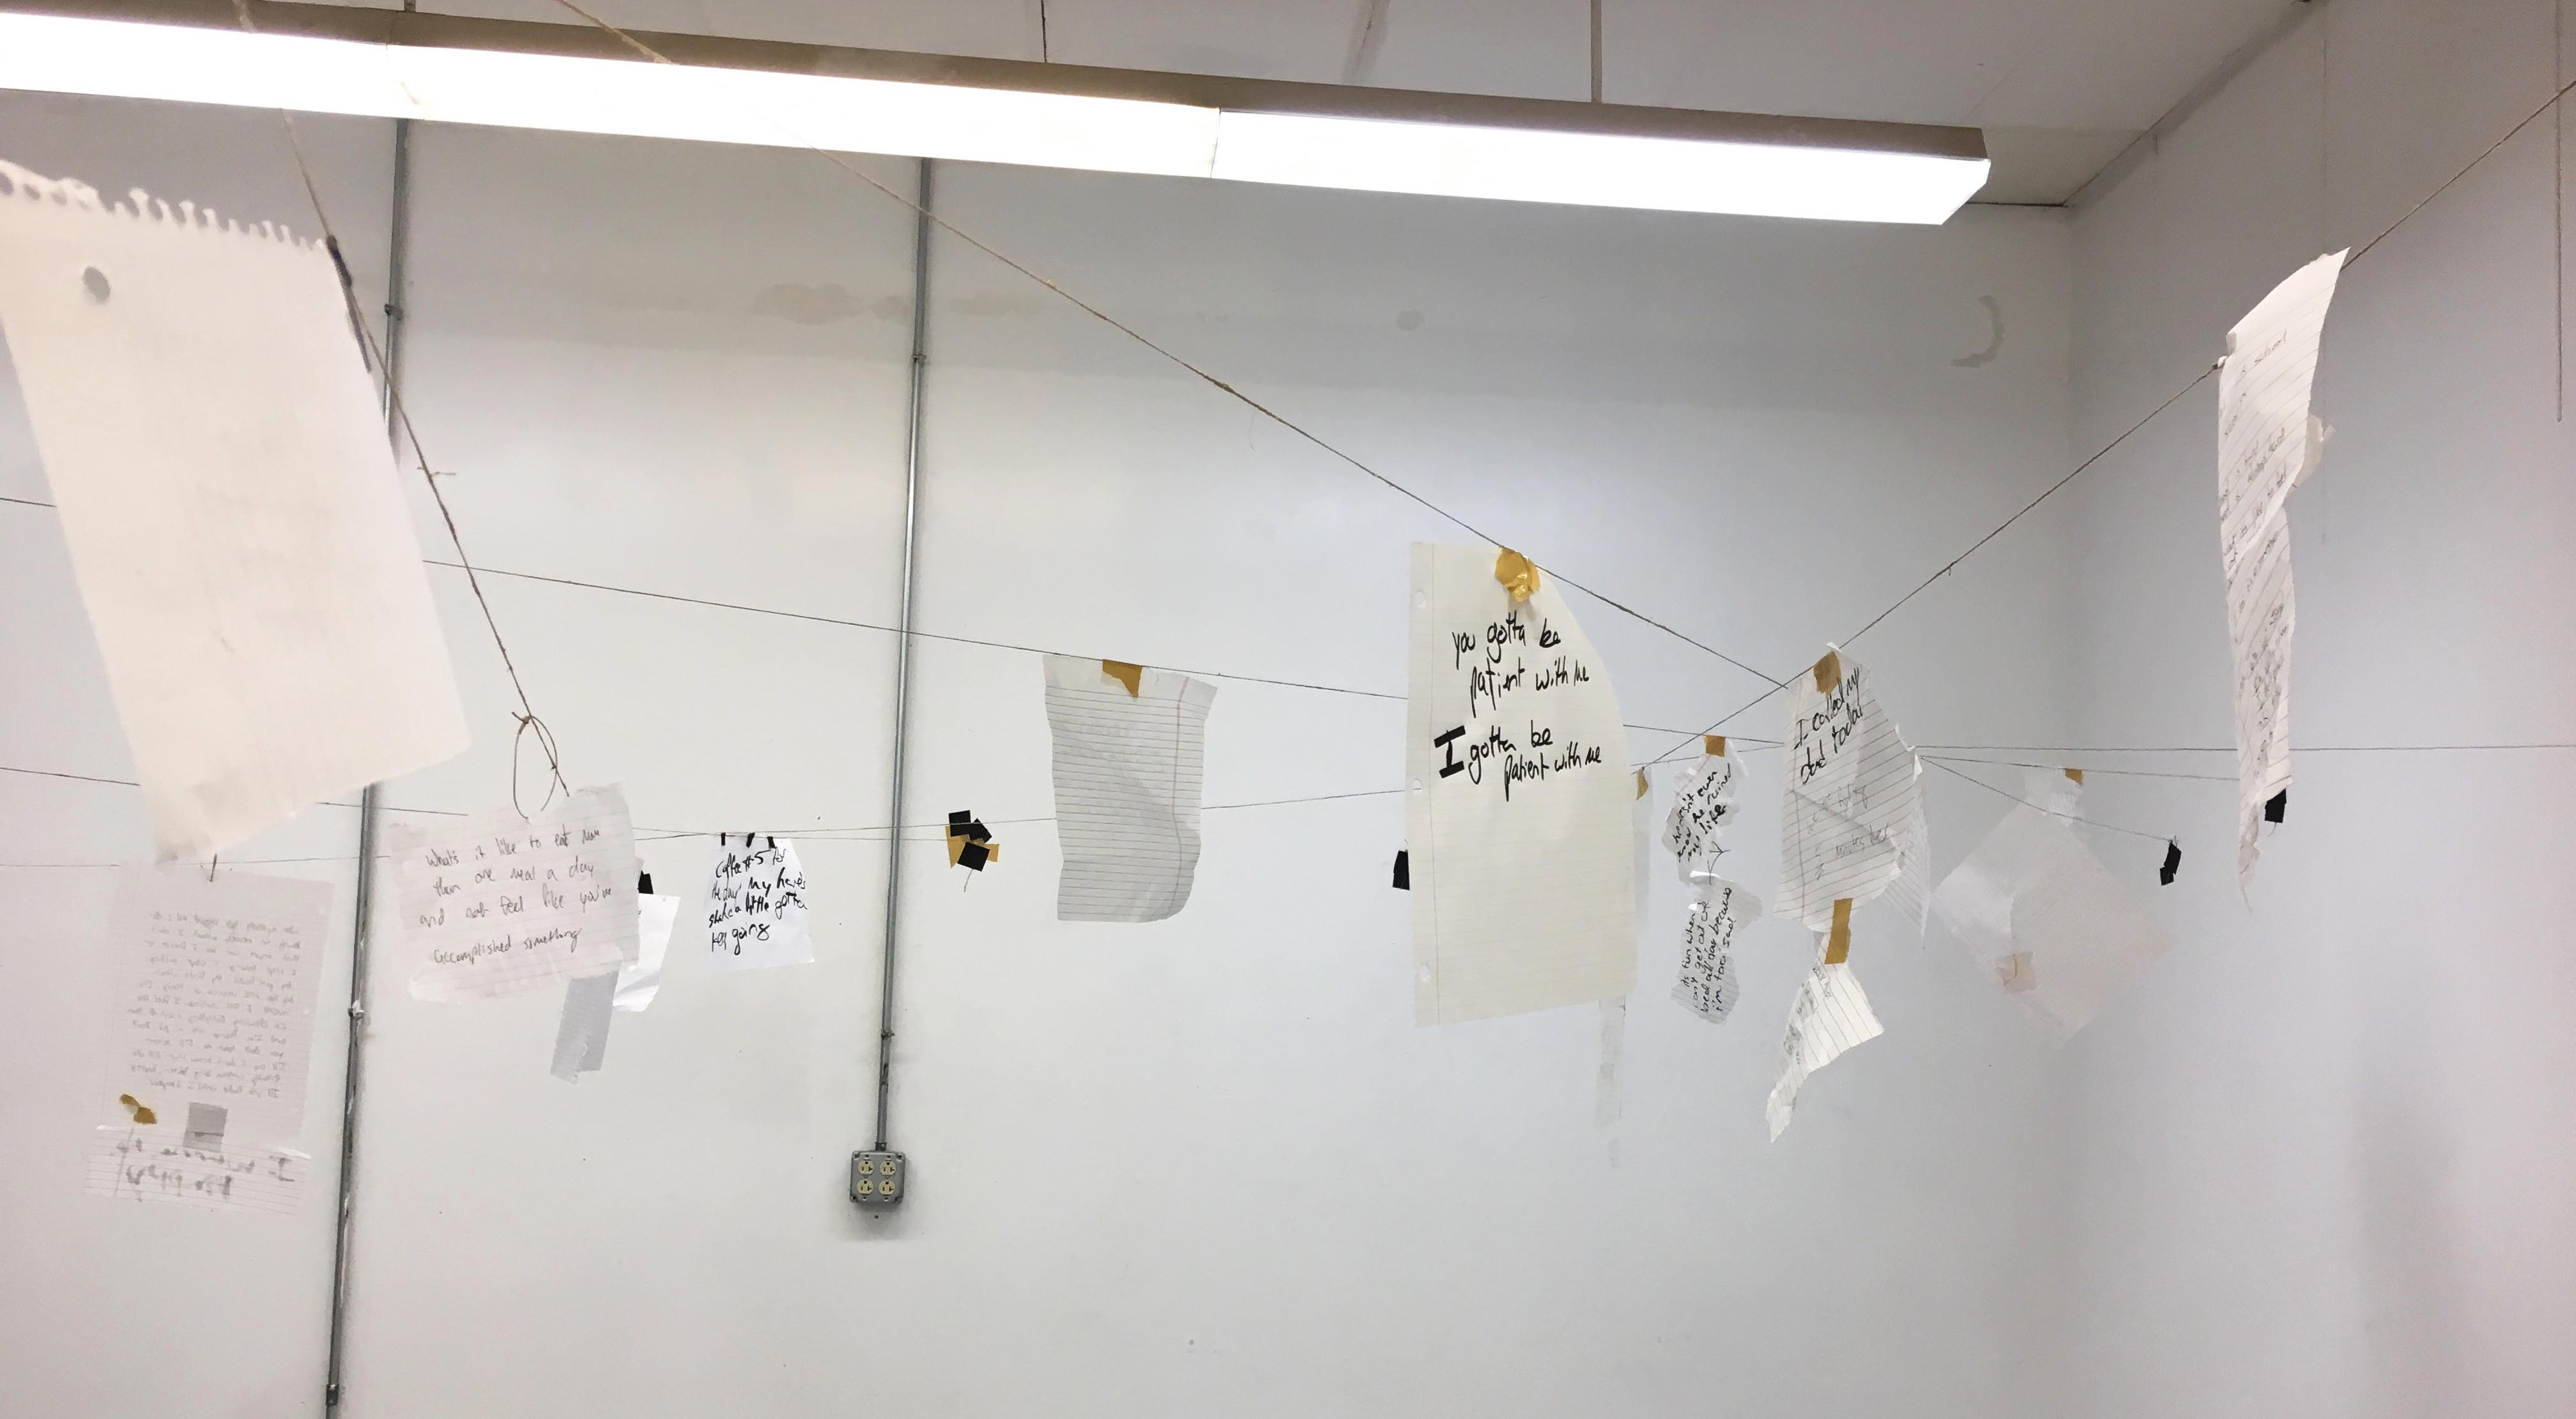 perspective of various pieces of paper with writing hung on hemp lines across a room